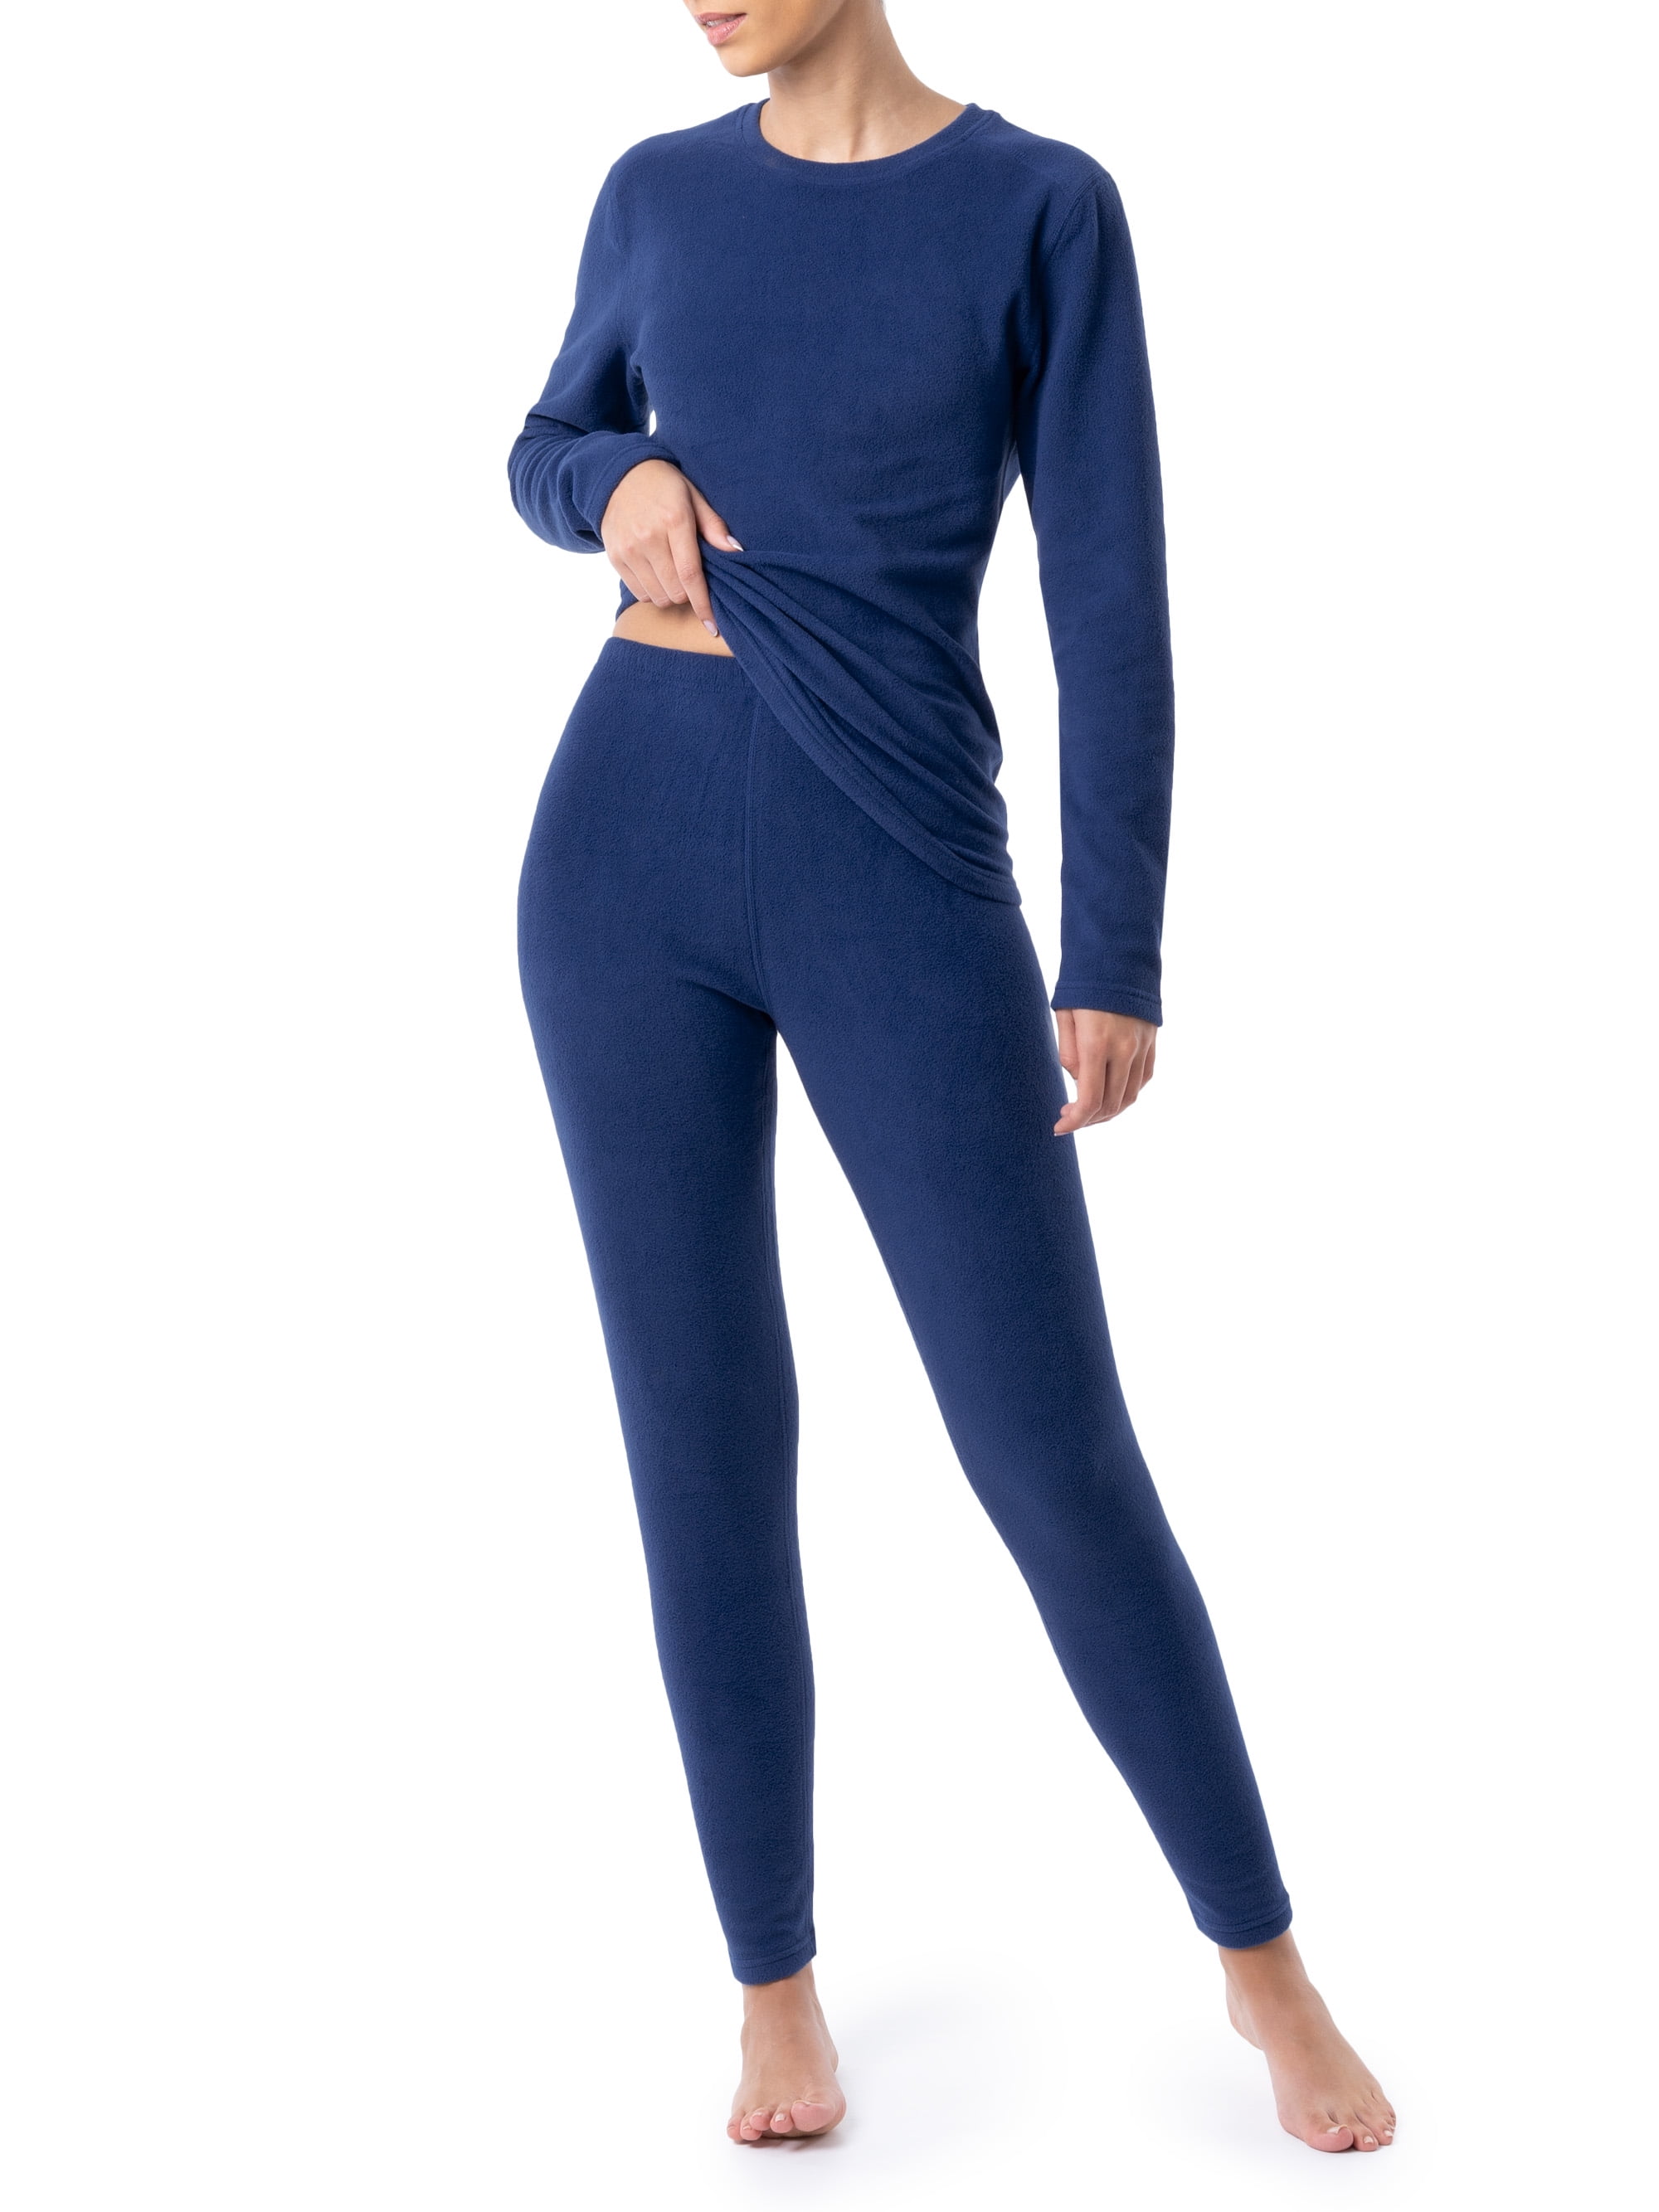 Fruit of the Loom Women's & Women's Plus Stretch Fleece Thermal Top and  Bottom Set